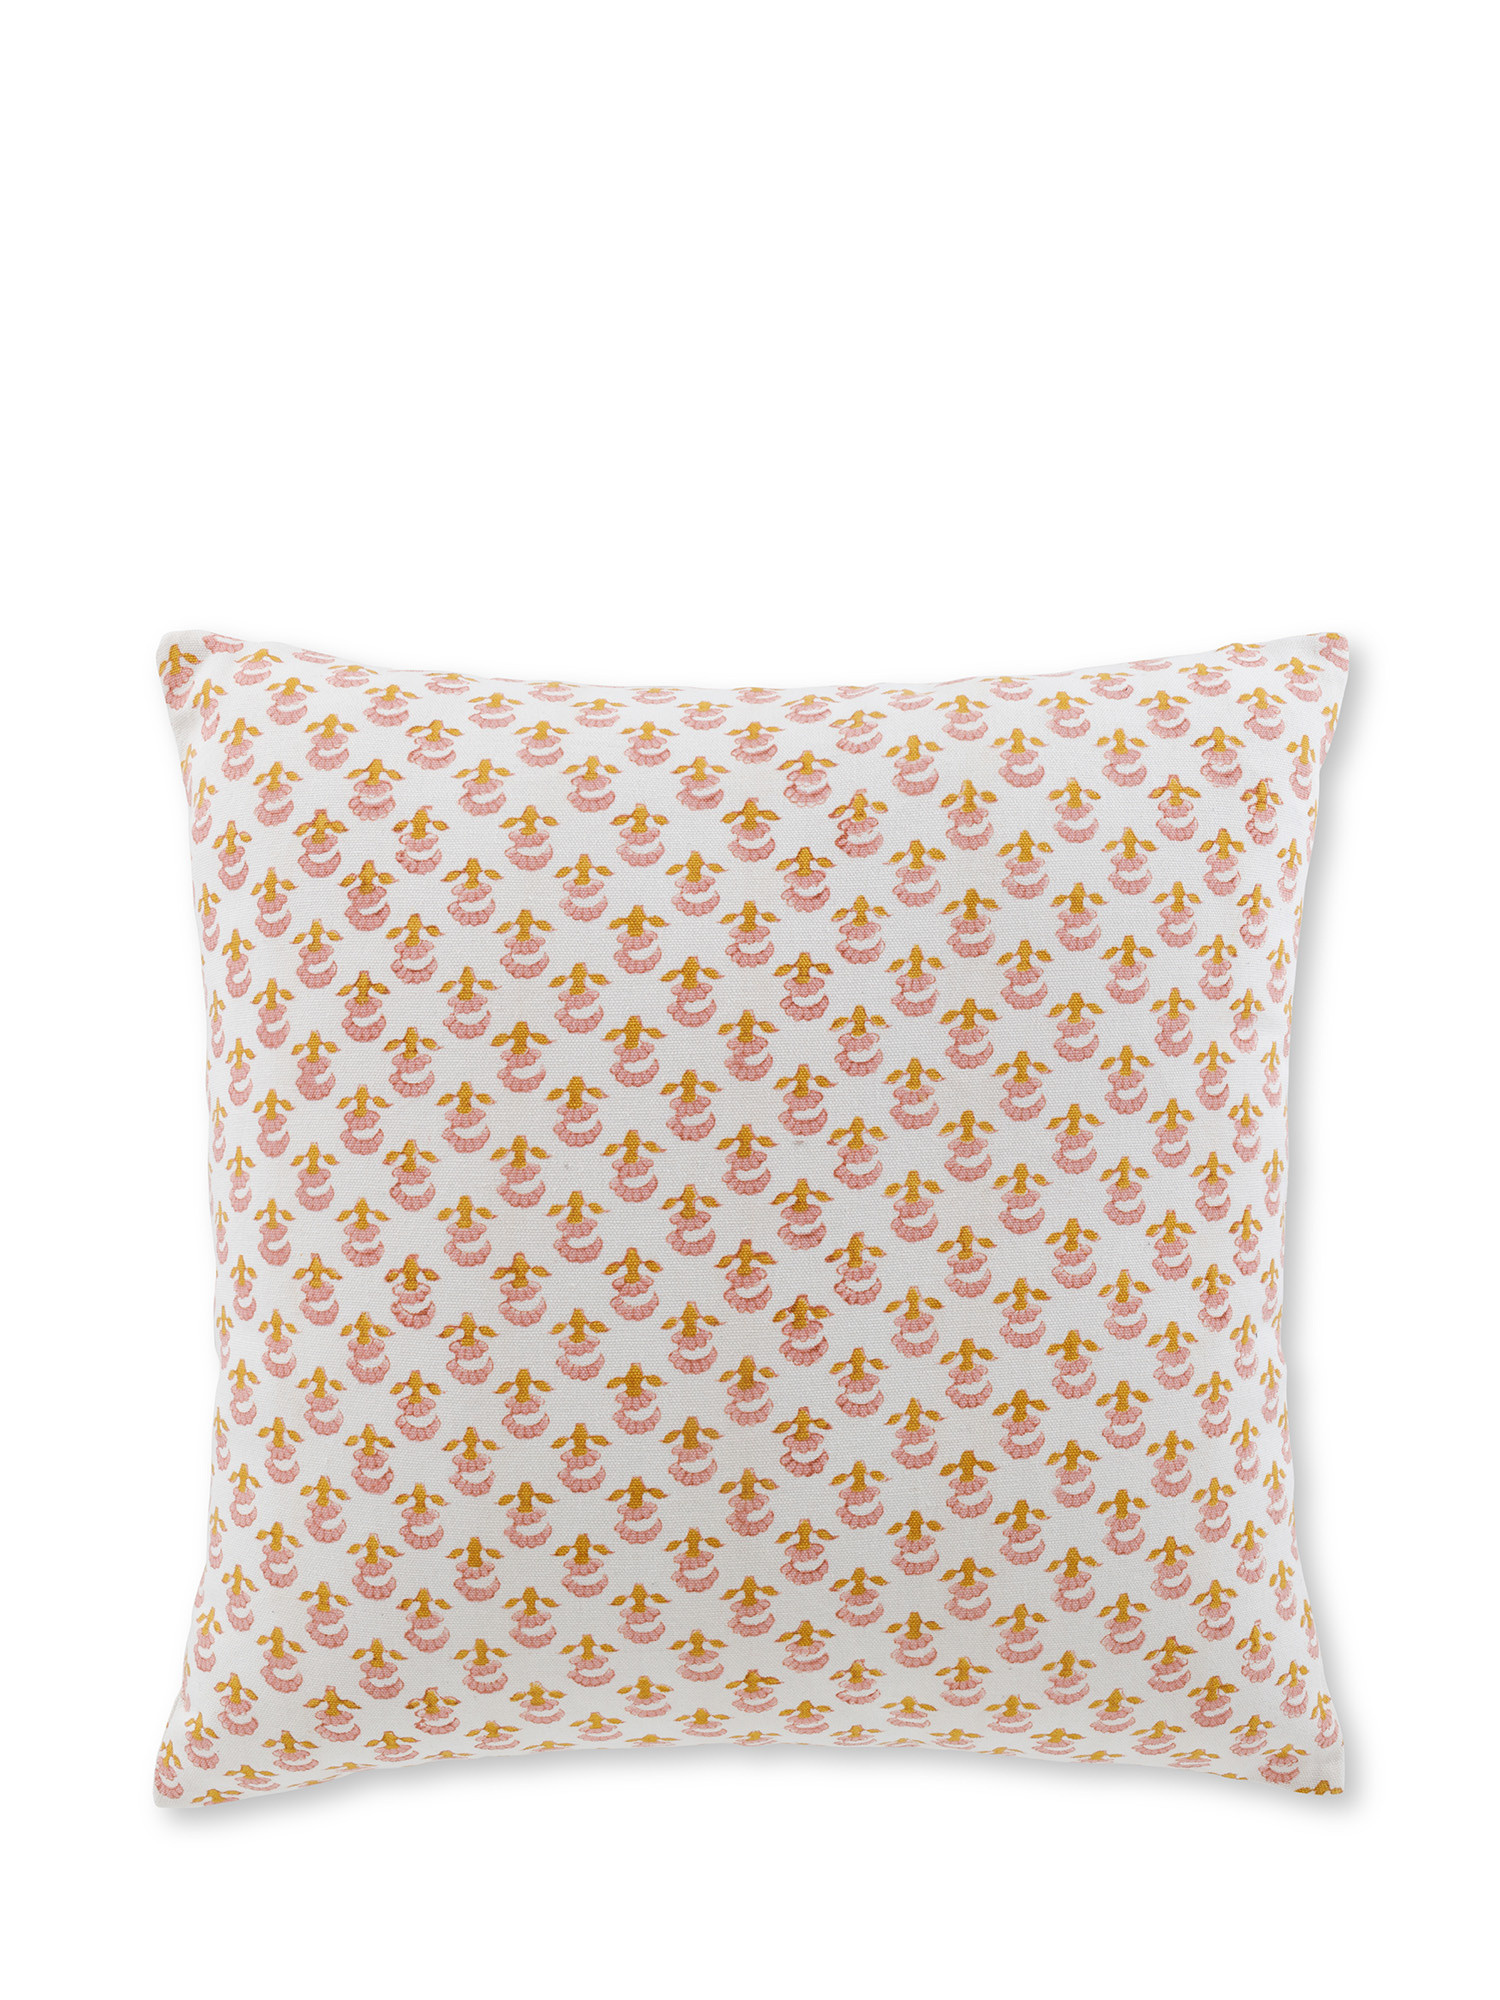 Cushion with micro flower print 45x45 cm, White, large image number 0